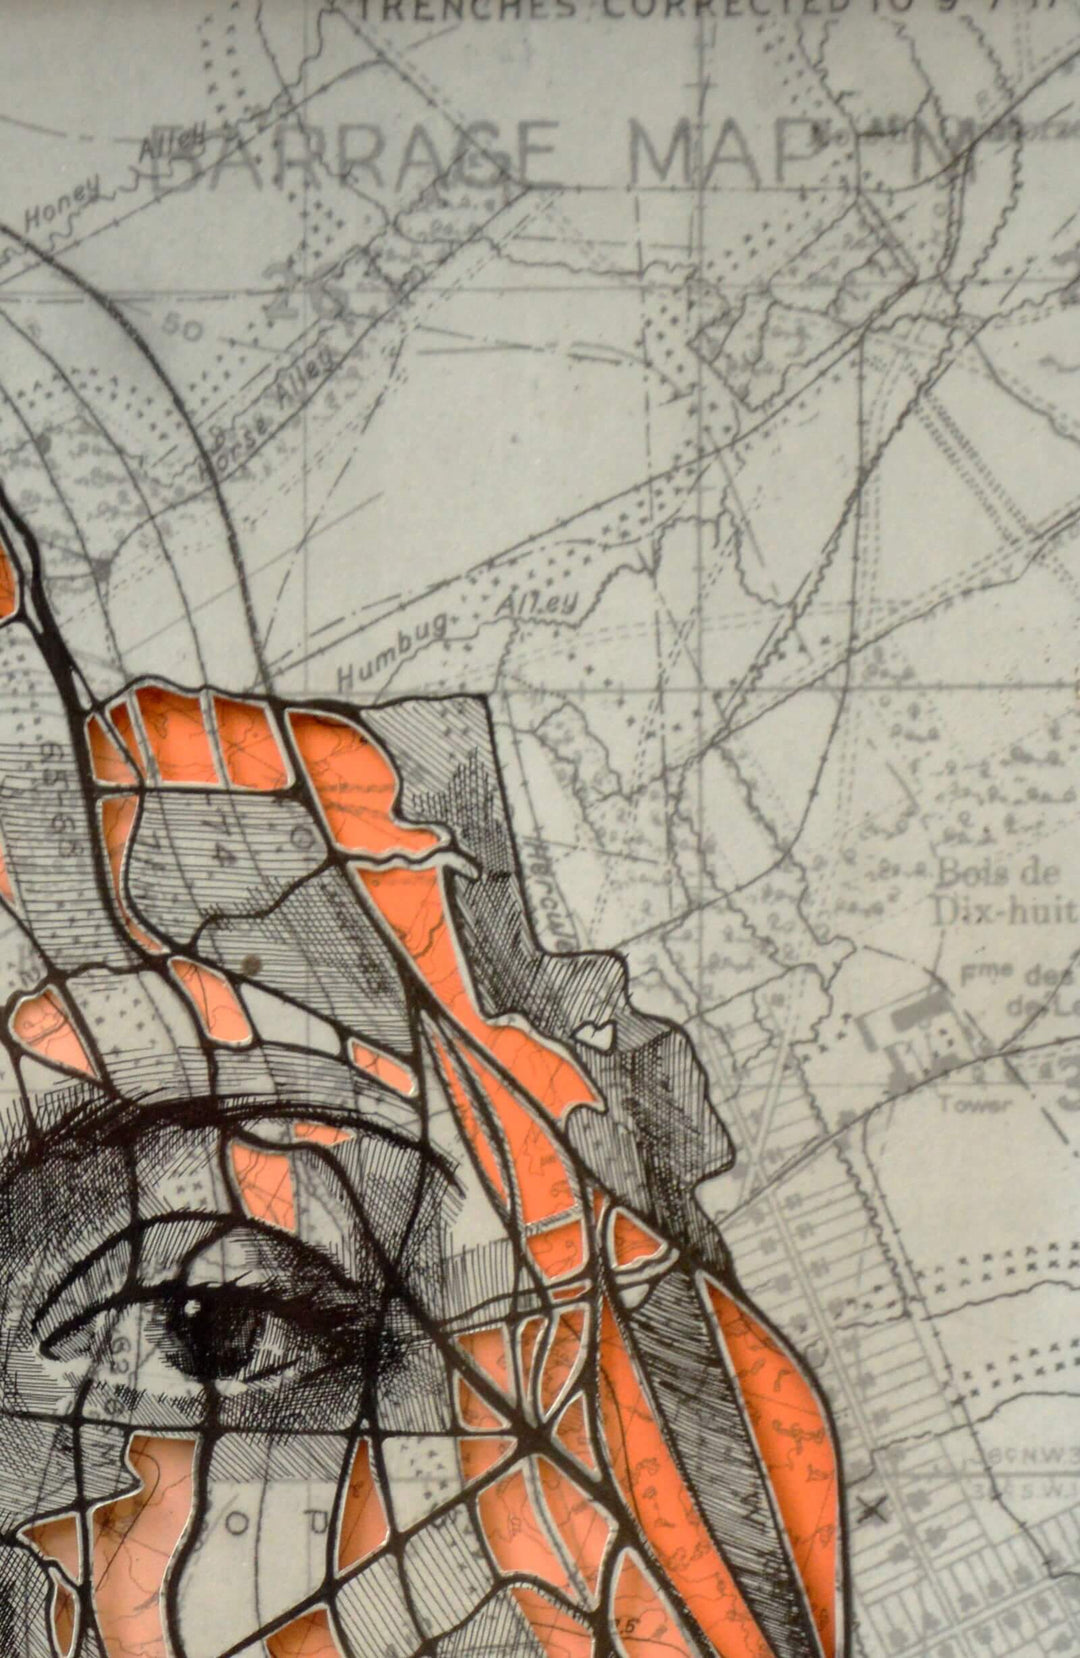 A drawing of a woman's face on a map using the Ed Fairburn "Western Front Cutout I".